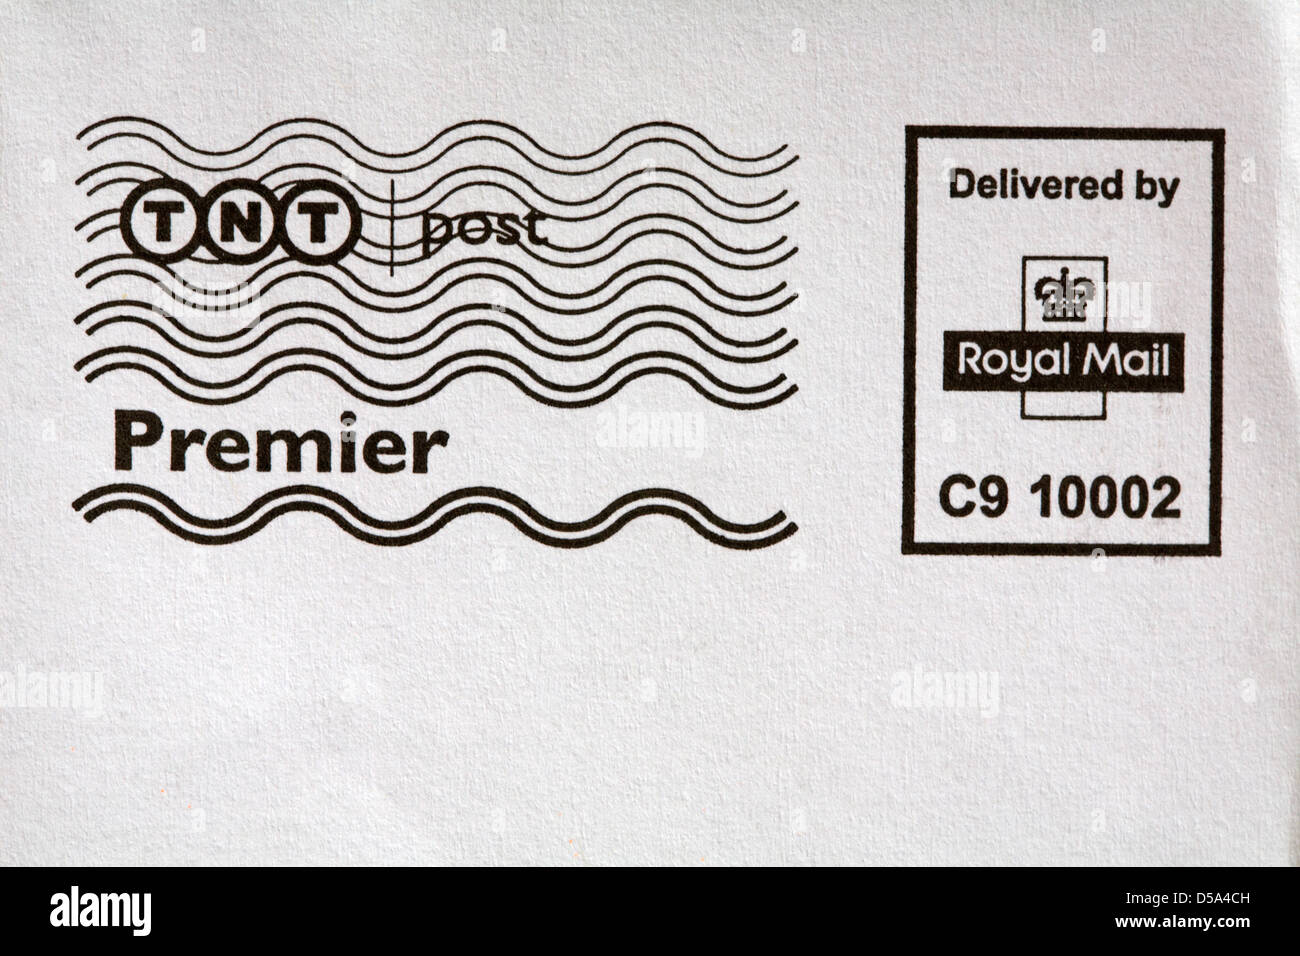 TNT Post Premier delivered by Royal Mail information on envelope Stock Photo